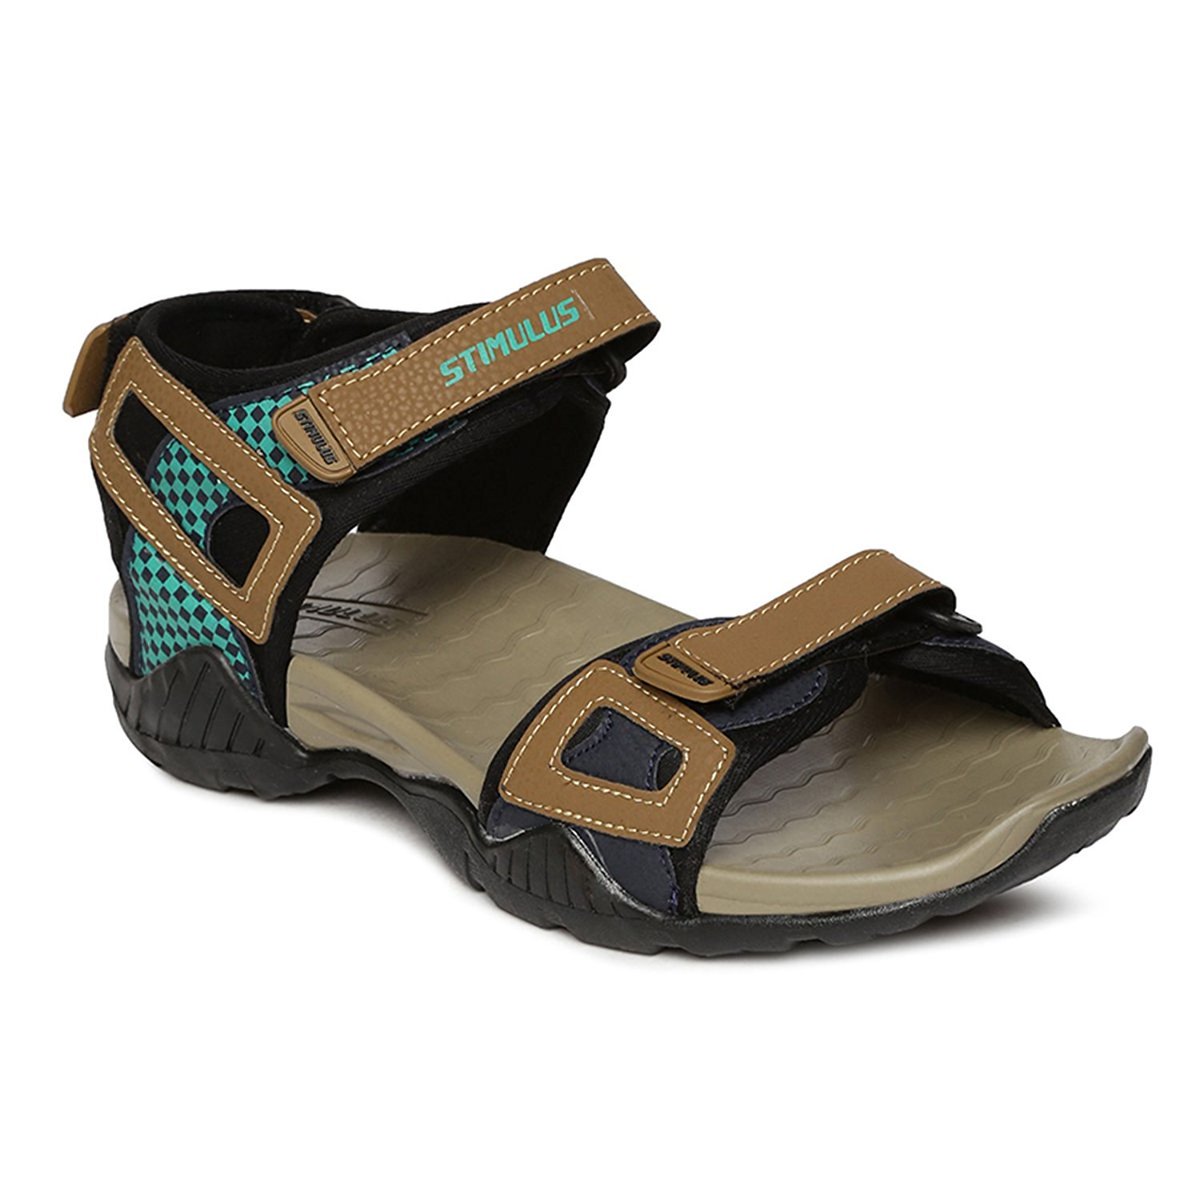 rainbow sandals 10 off coupon